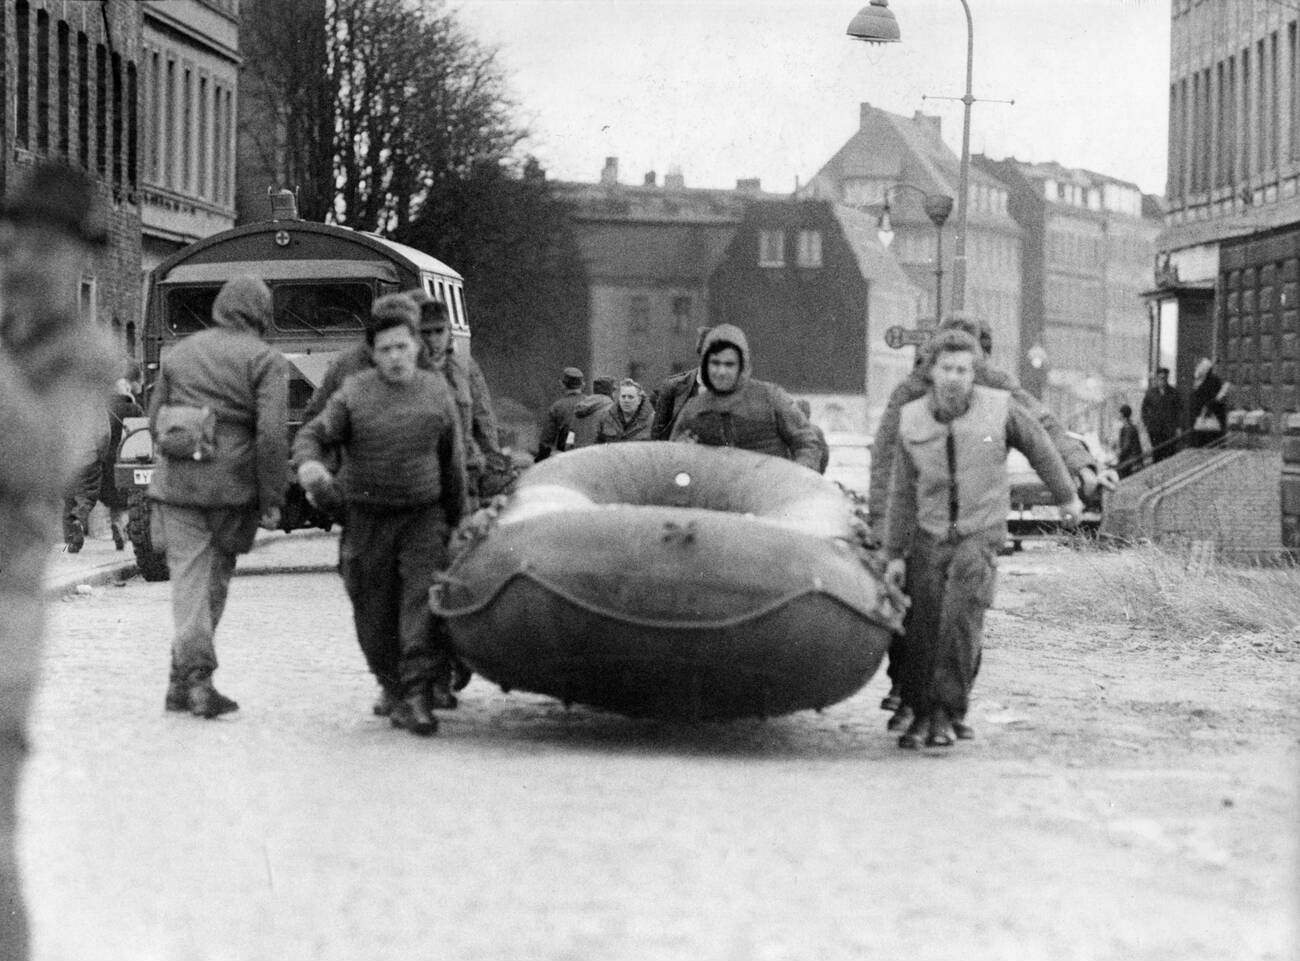 Aids of Civil Defence with an inflatable boat during the North Sea Flood of 1962 in Hamburg, West Germany